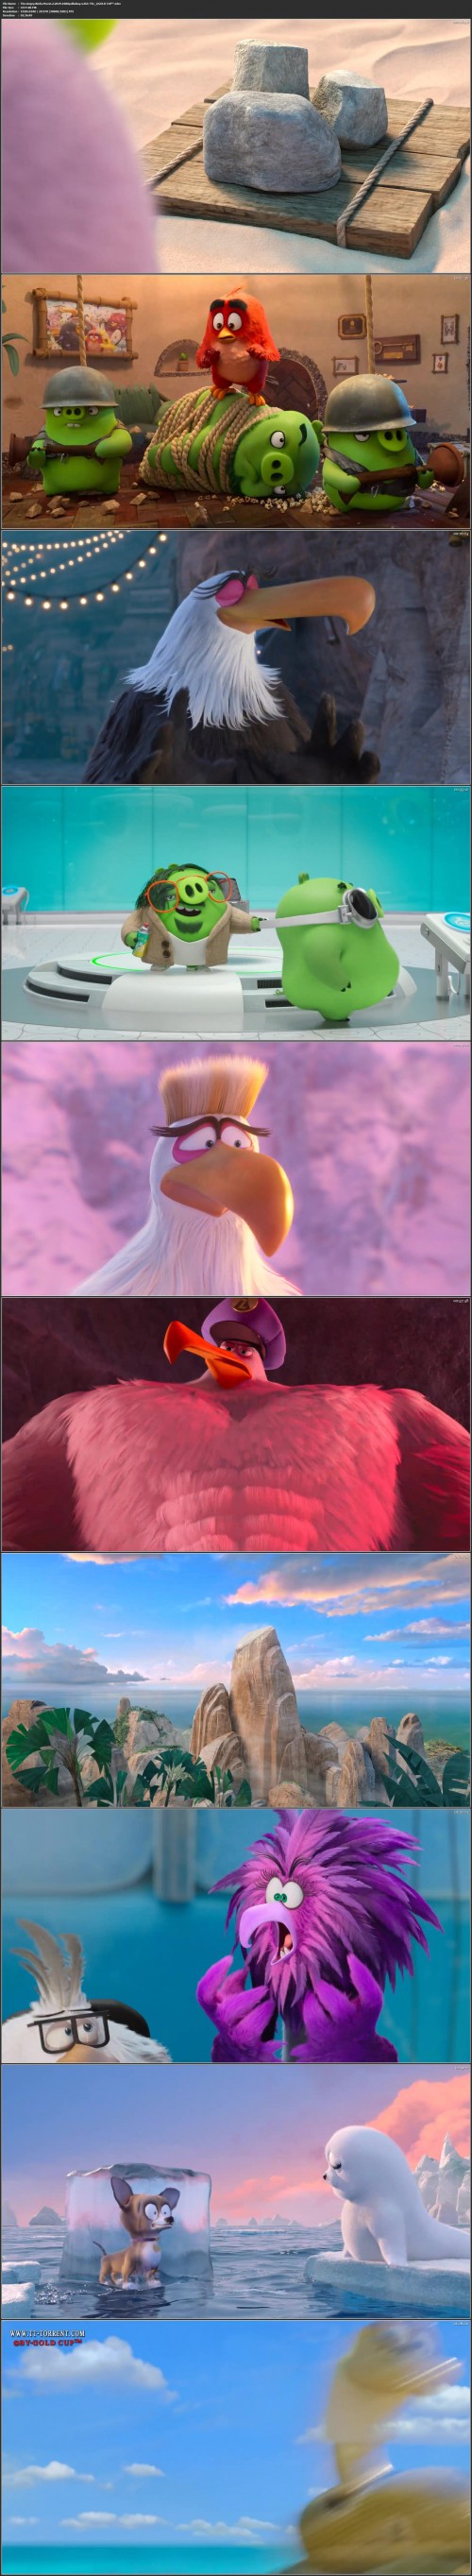 The.Angry.Birds.Movie.2.2019.1080p.BluRay.x264 Thr ©GOLD CUP™.mkv